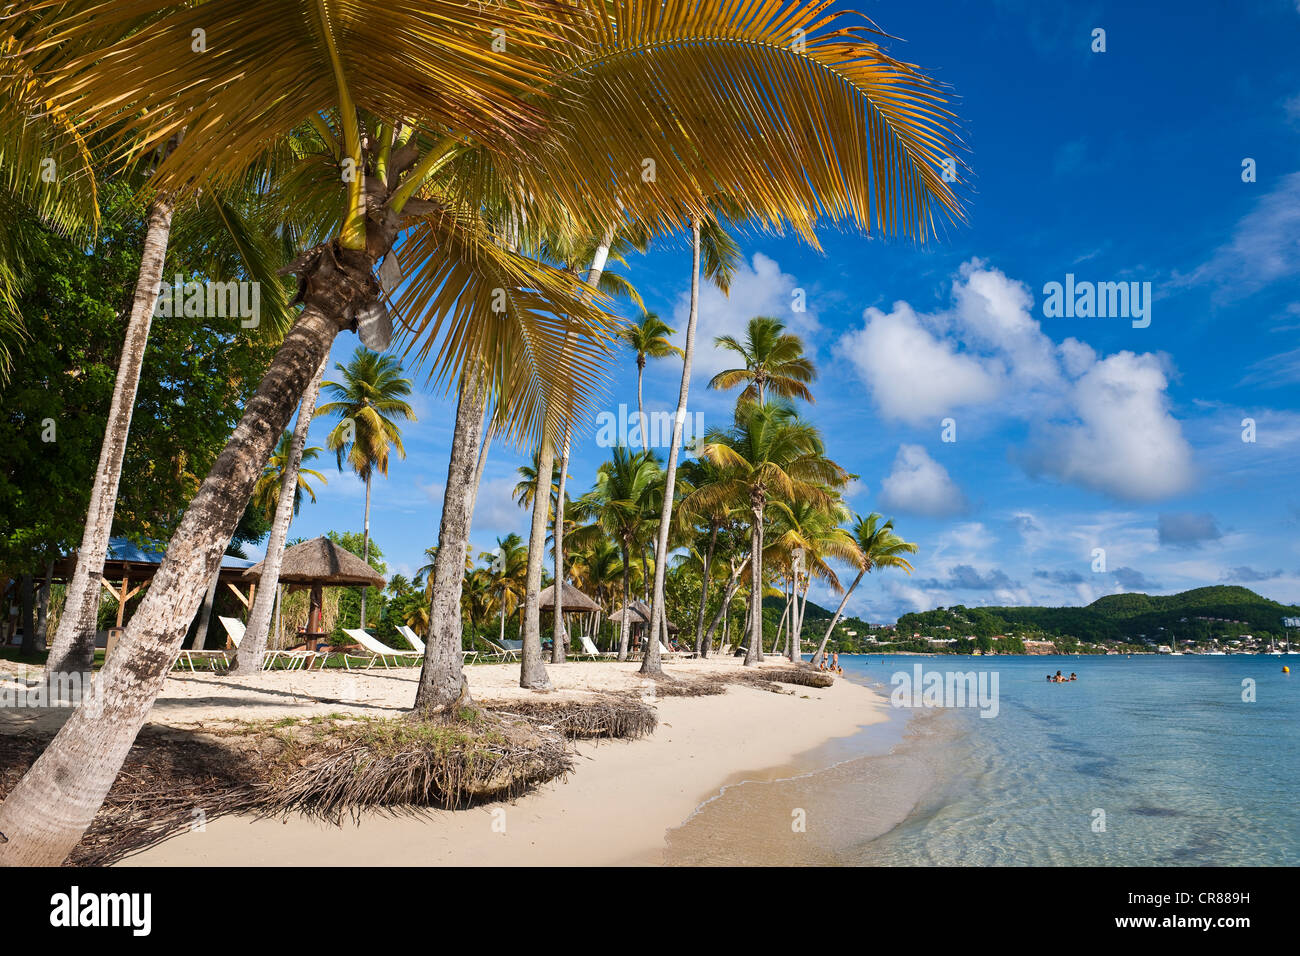 France, Martinique (French West Indies), Pointe Marin, Club Med Buccaneer's creek beach Stock Photo